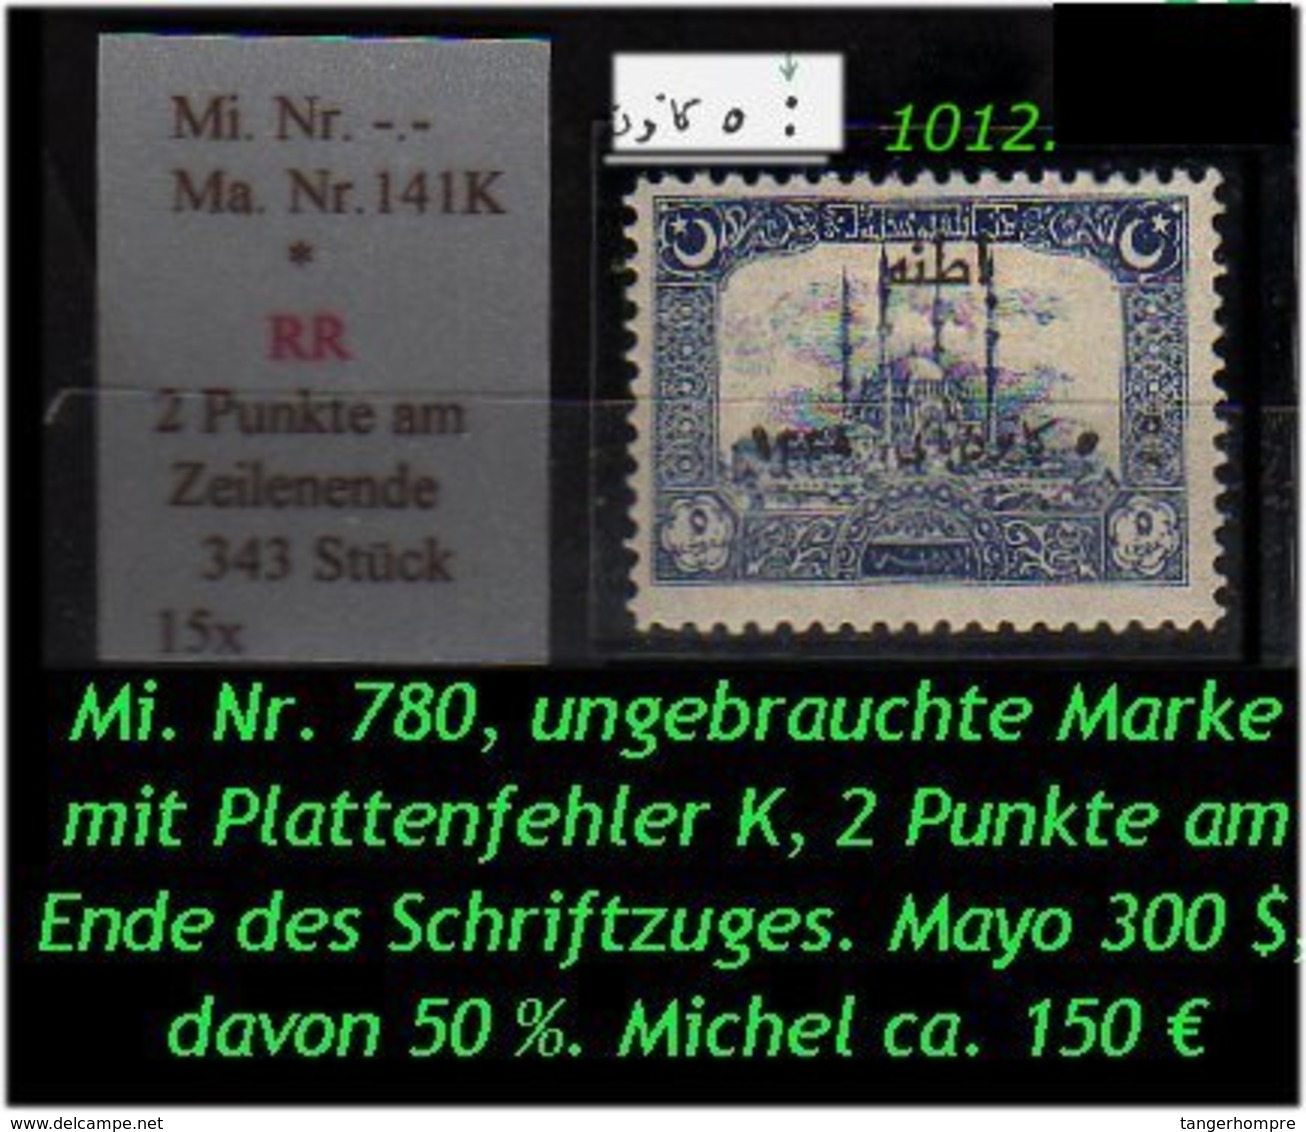 EARLY OTTOMAN SPECIALIZED FOR SPECIALIST, SEE...Mi. Nr. 780 Mit Plattenfehler - Mayo 141 K - Ongebruikt